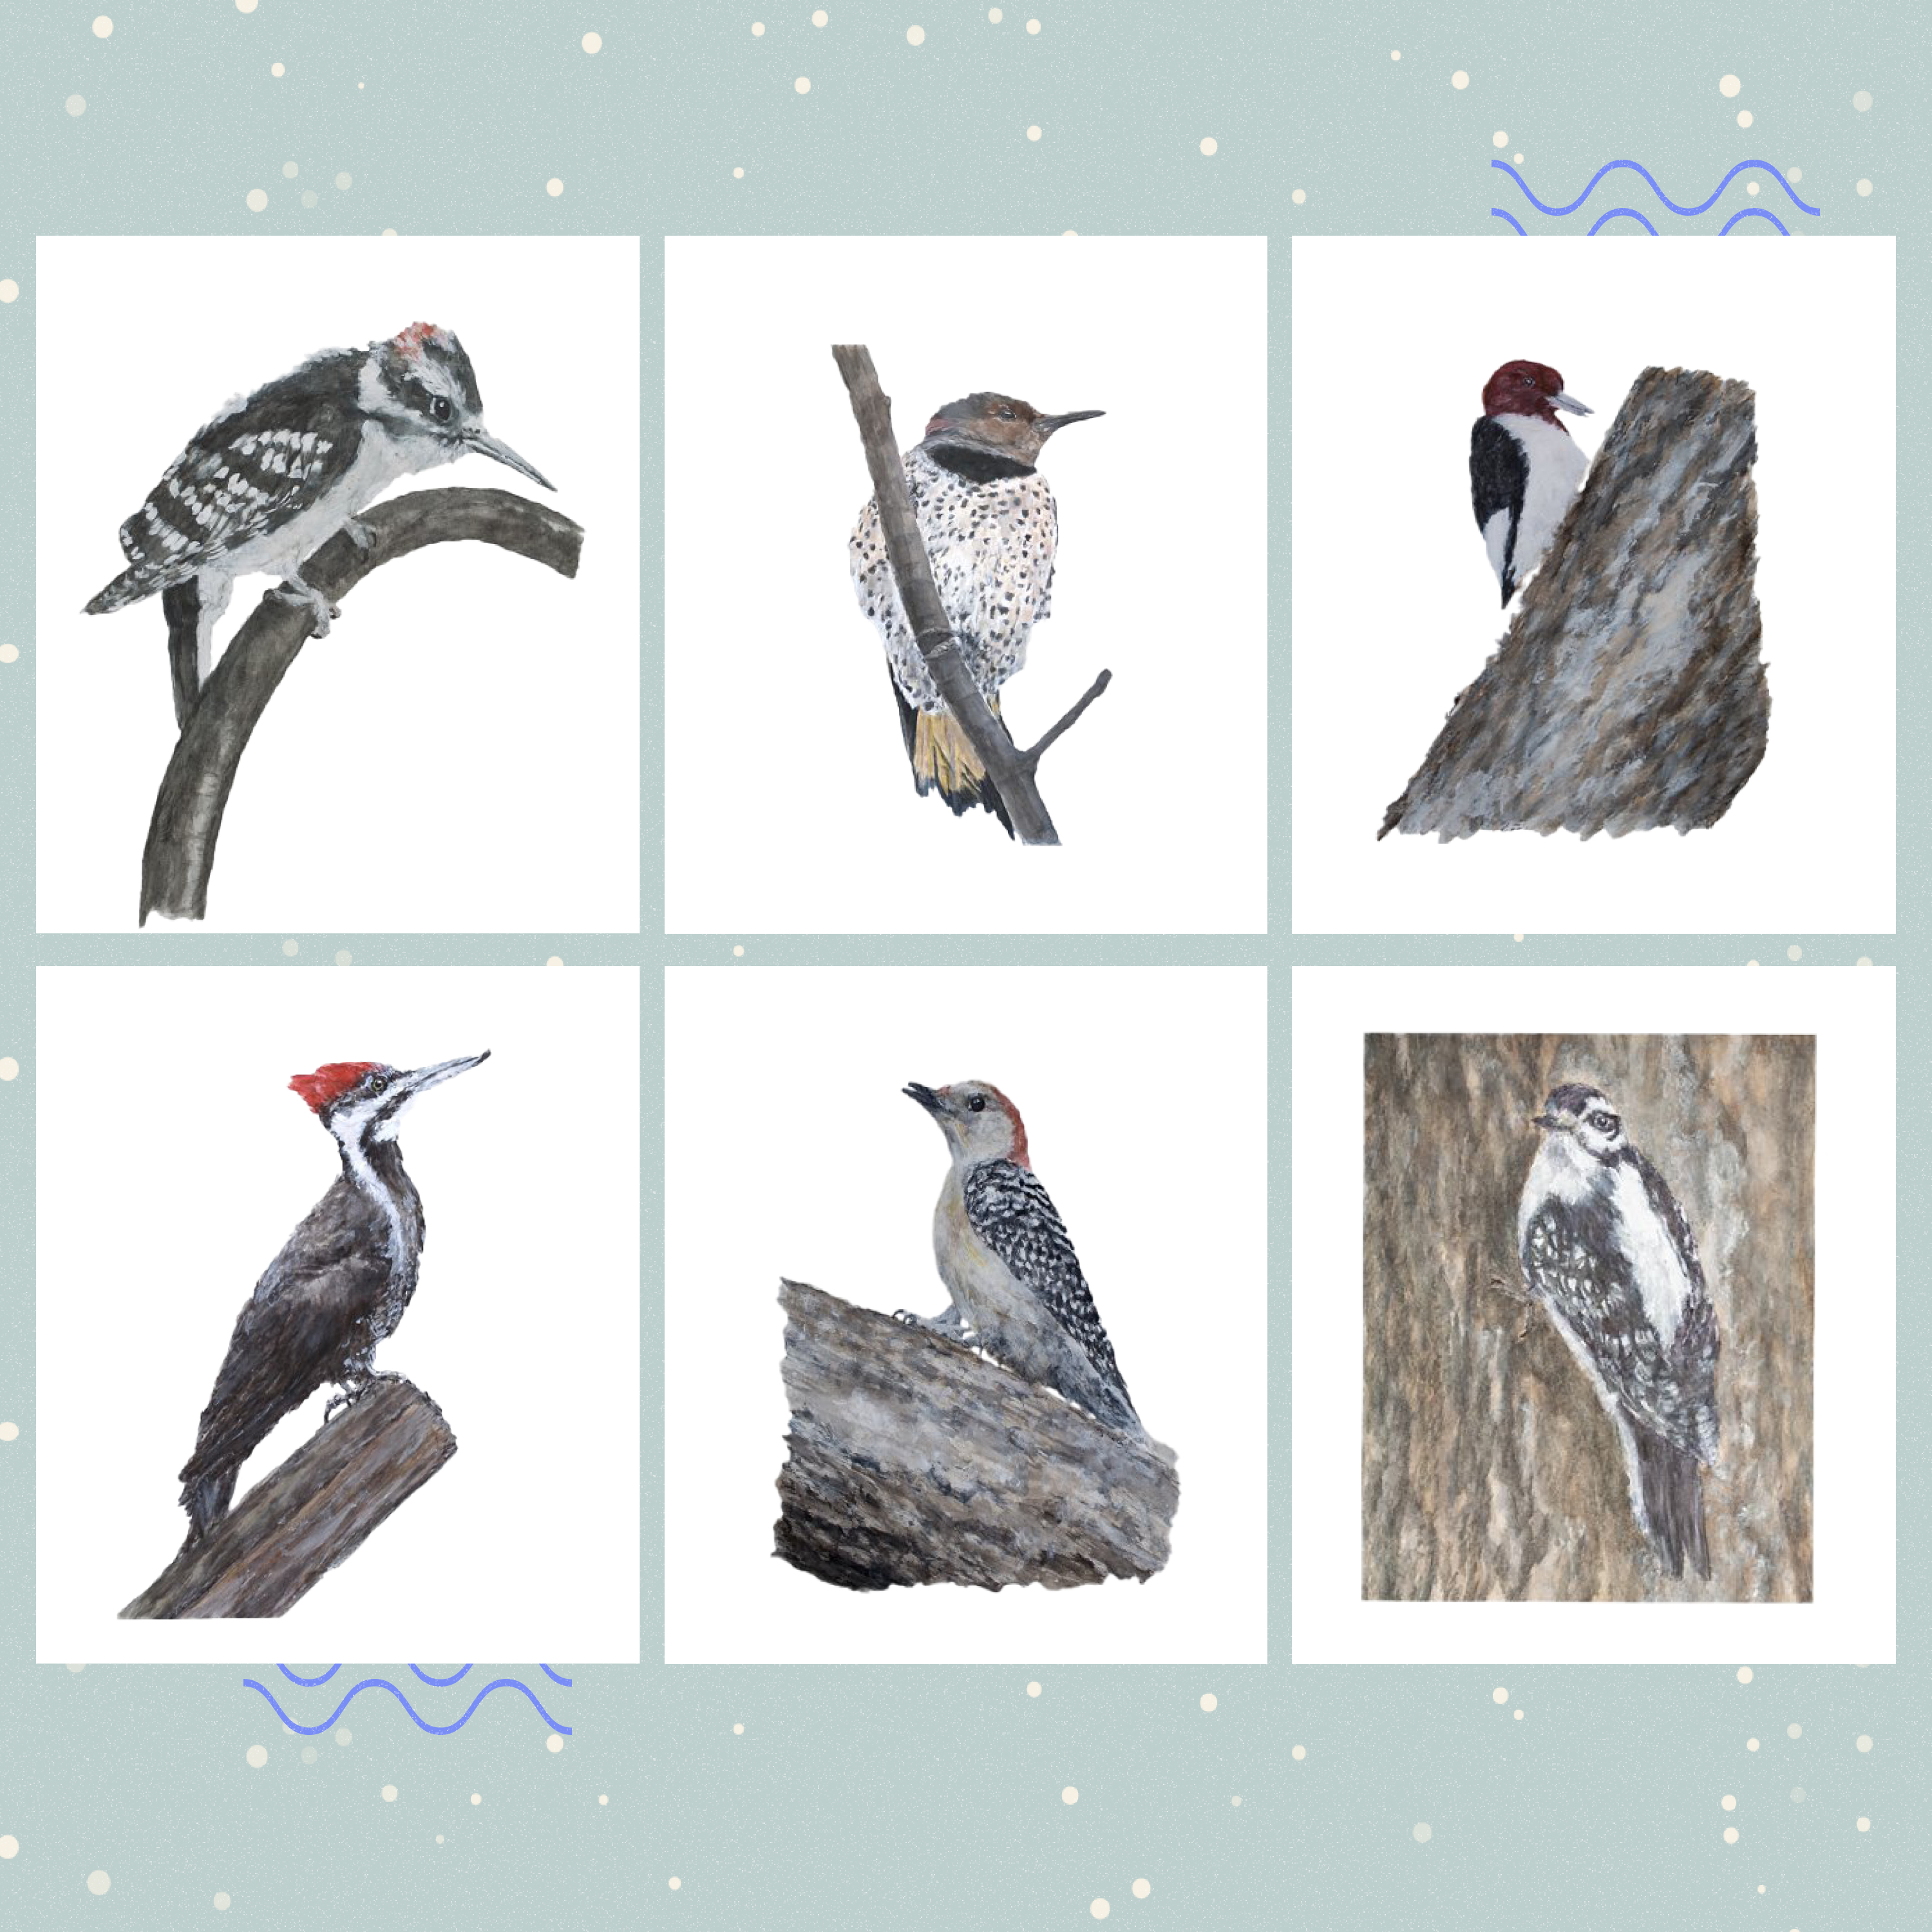 Preview of woodpeckers in the image.